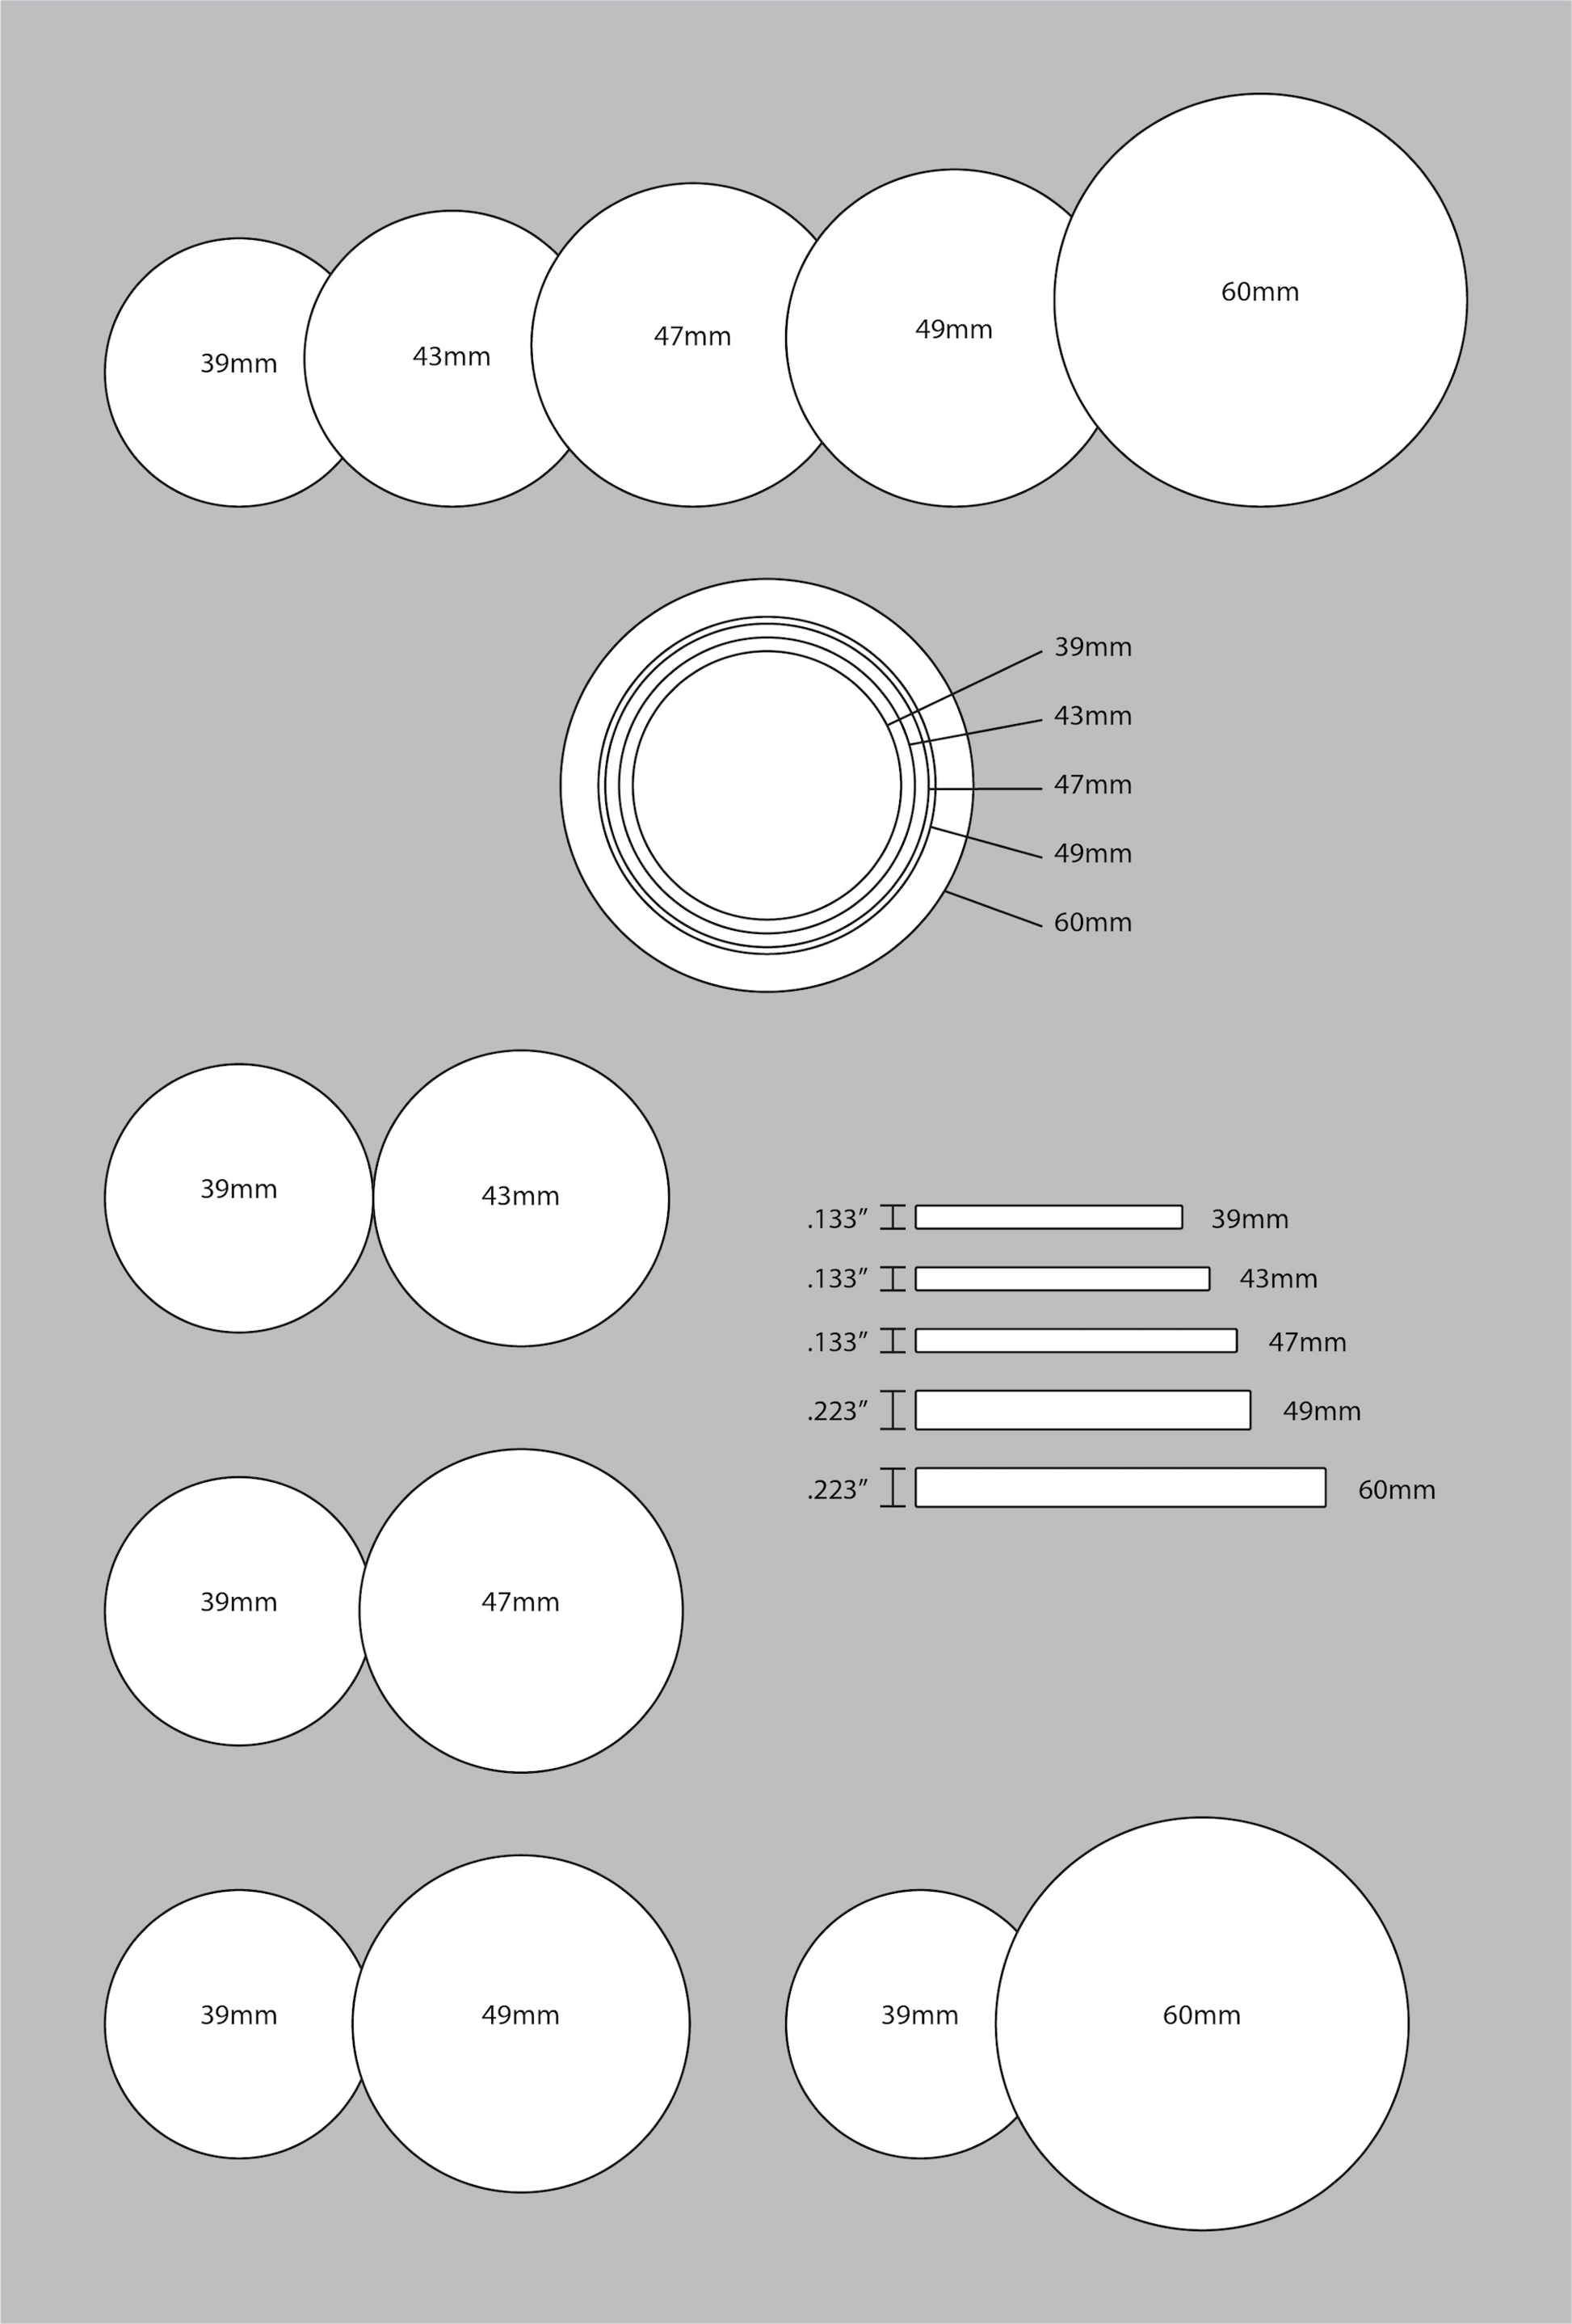 Poker chip size comparison diagram, infographic. This chart shows how the different sizes of poker chips compare to one another. Ceramic poker chip sizes Aurora Poker Gear carries are: 39mm, 43mm, 47mm. Ceramic dealer buttons sizes are 49mm and 60mm.